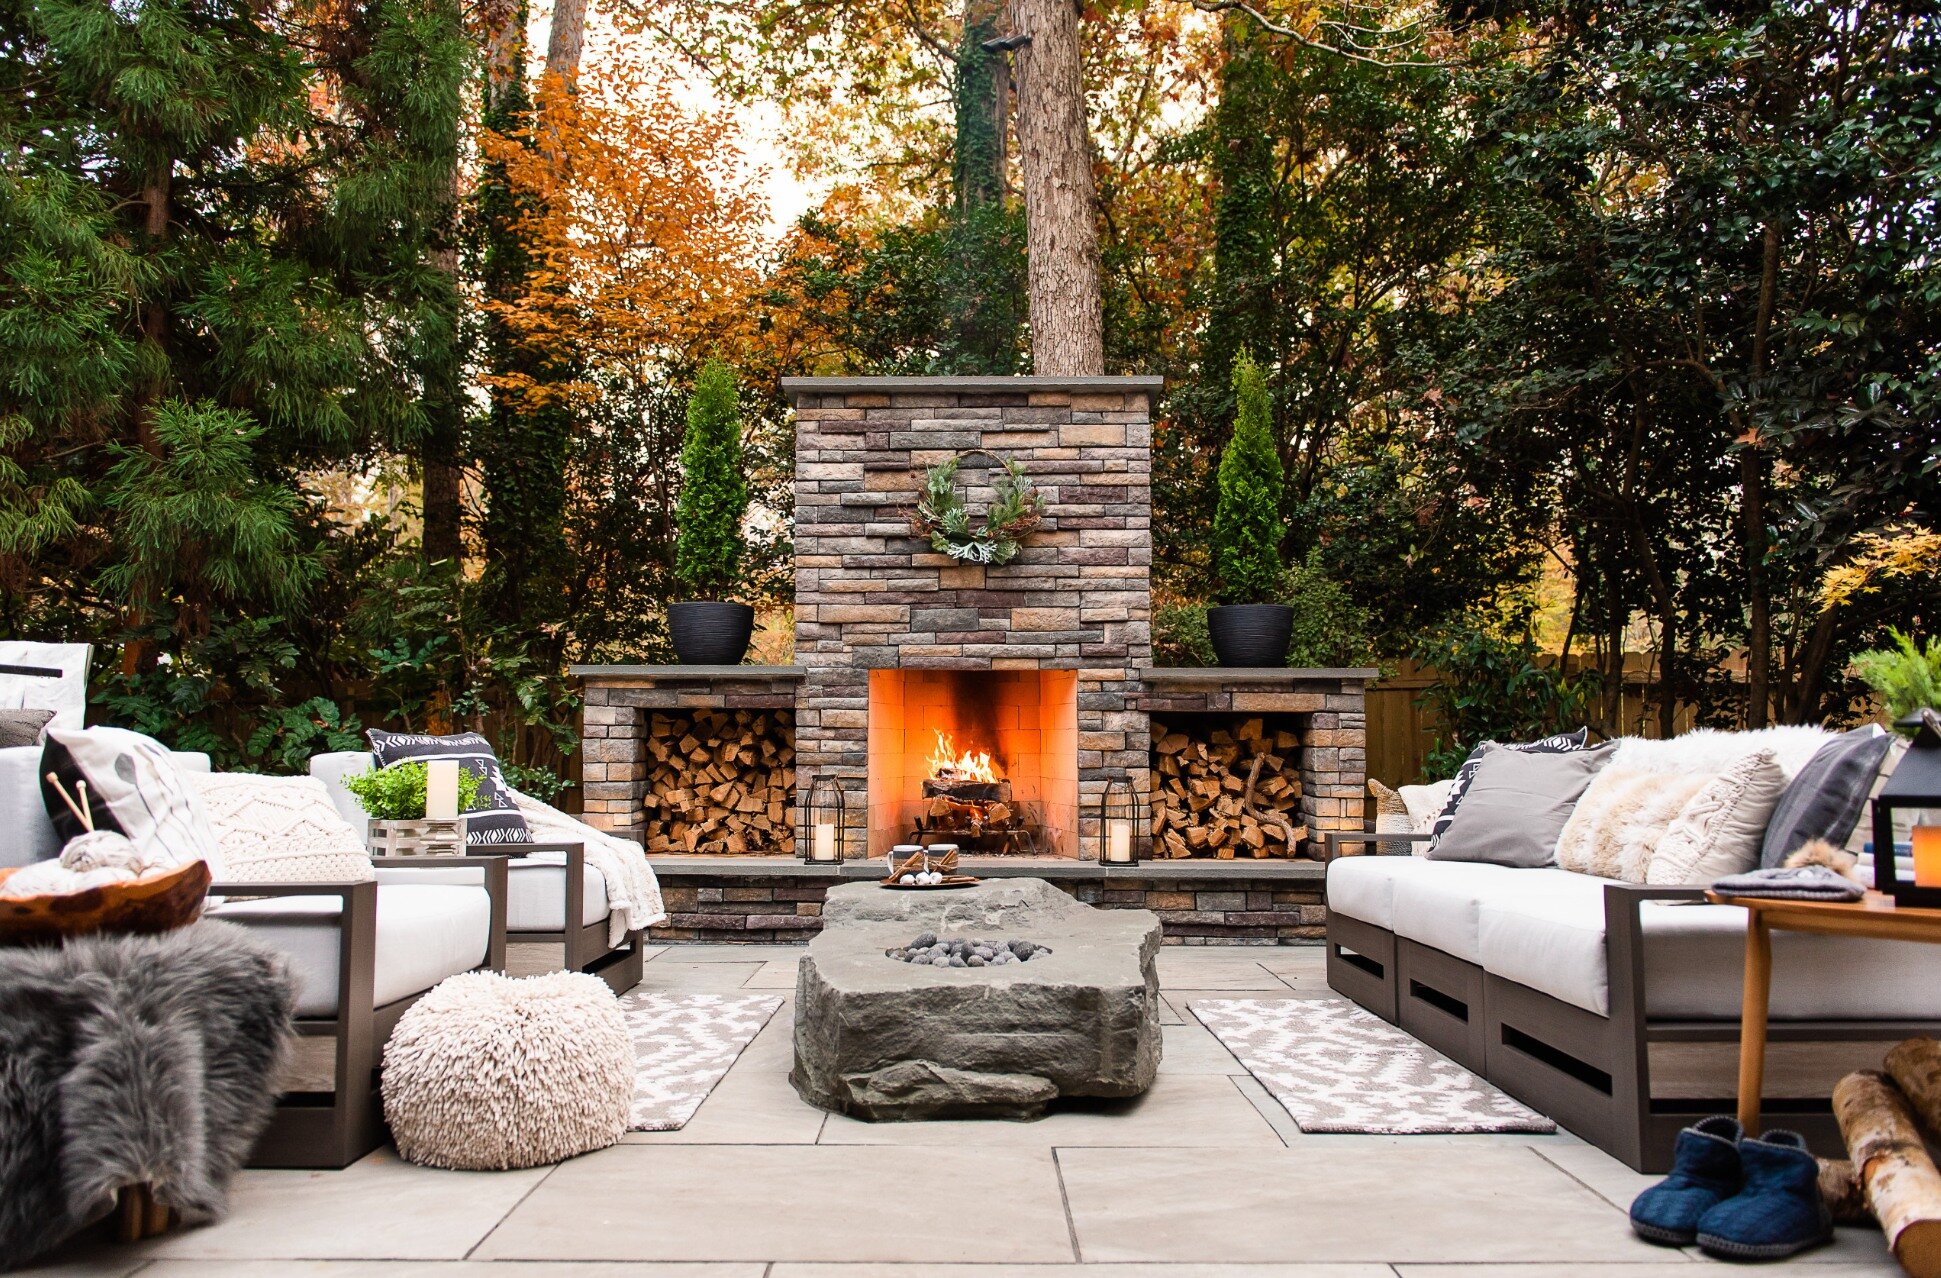 Memorable Outdoor Warmth. Want an outdoor fireplace that guests will remember? We guarantee outdoor fire features that leave a lasting impression. Make it memorable with Sweeps N Ladders. #LastingImpressions🔥

#sweepsnladders #fireplacerenovation #c